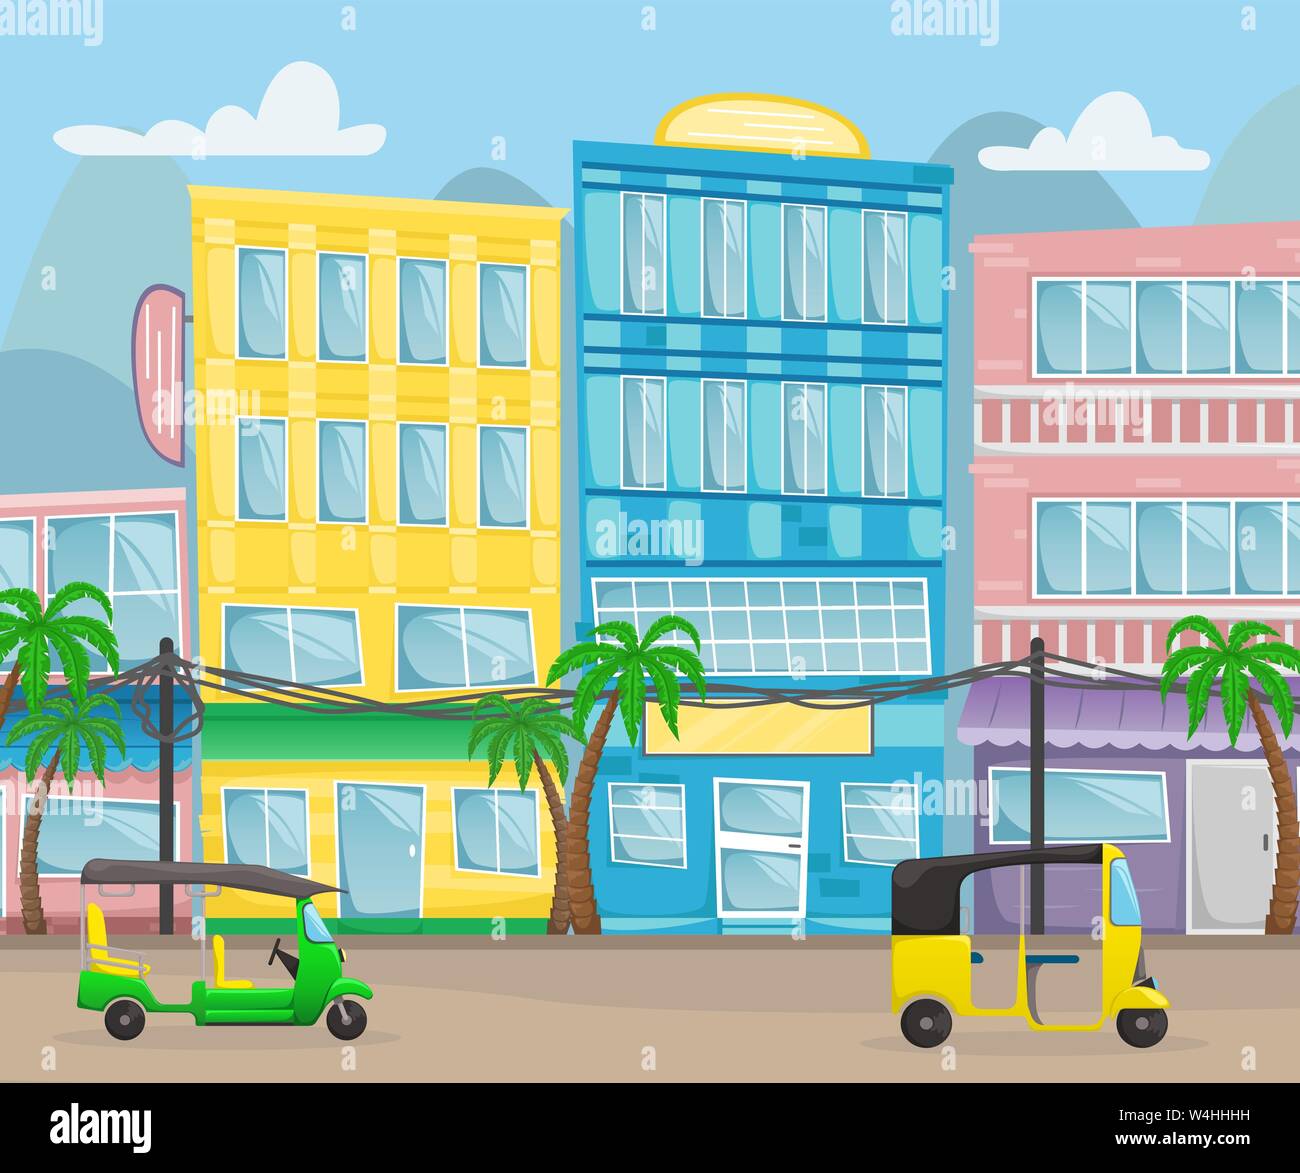 Asian street with colorful buildings, electric wires and tuk tuks on the roads. Vector cartoon illustration Stock Vector